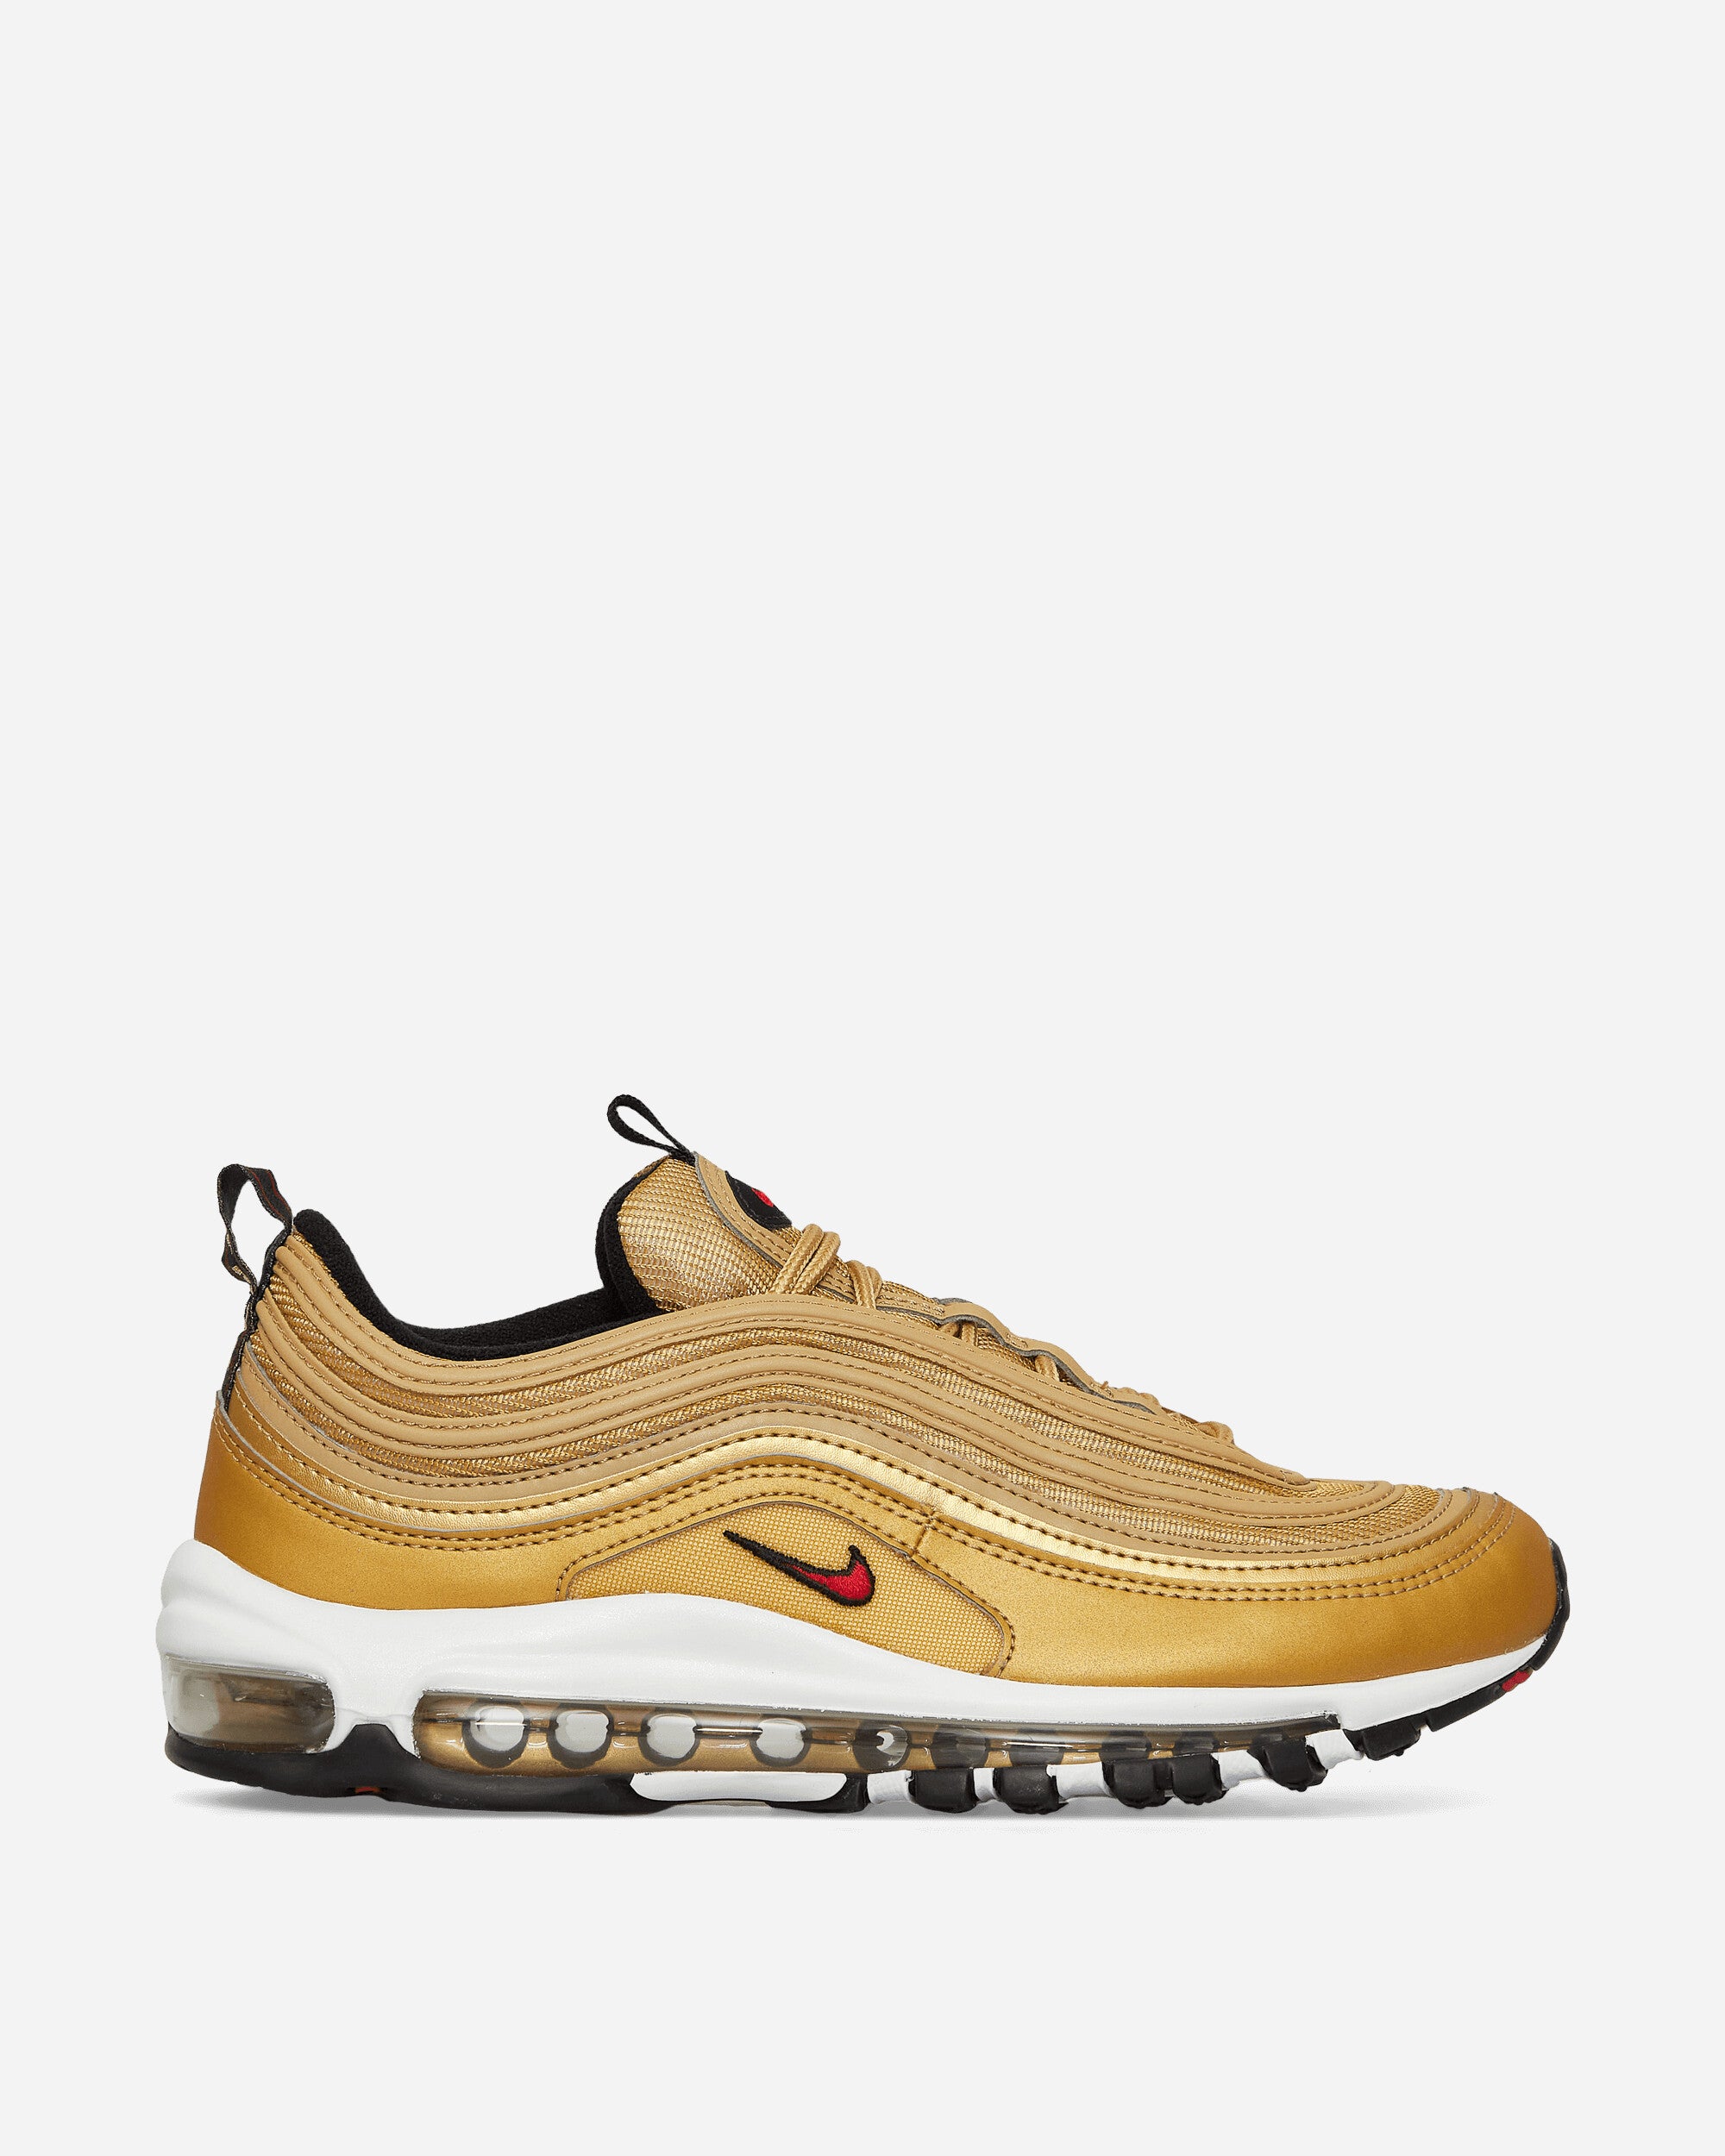 Nike Wmns Air Max 97 Og Metallic Gold/Varsity Red Sneakers Low DQ9131-700